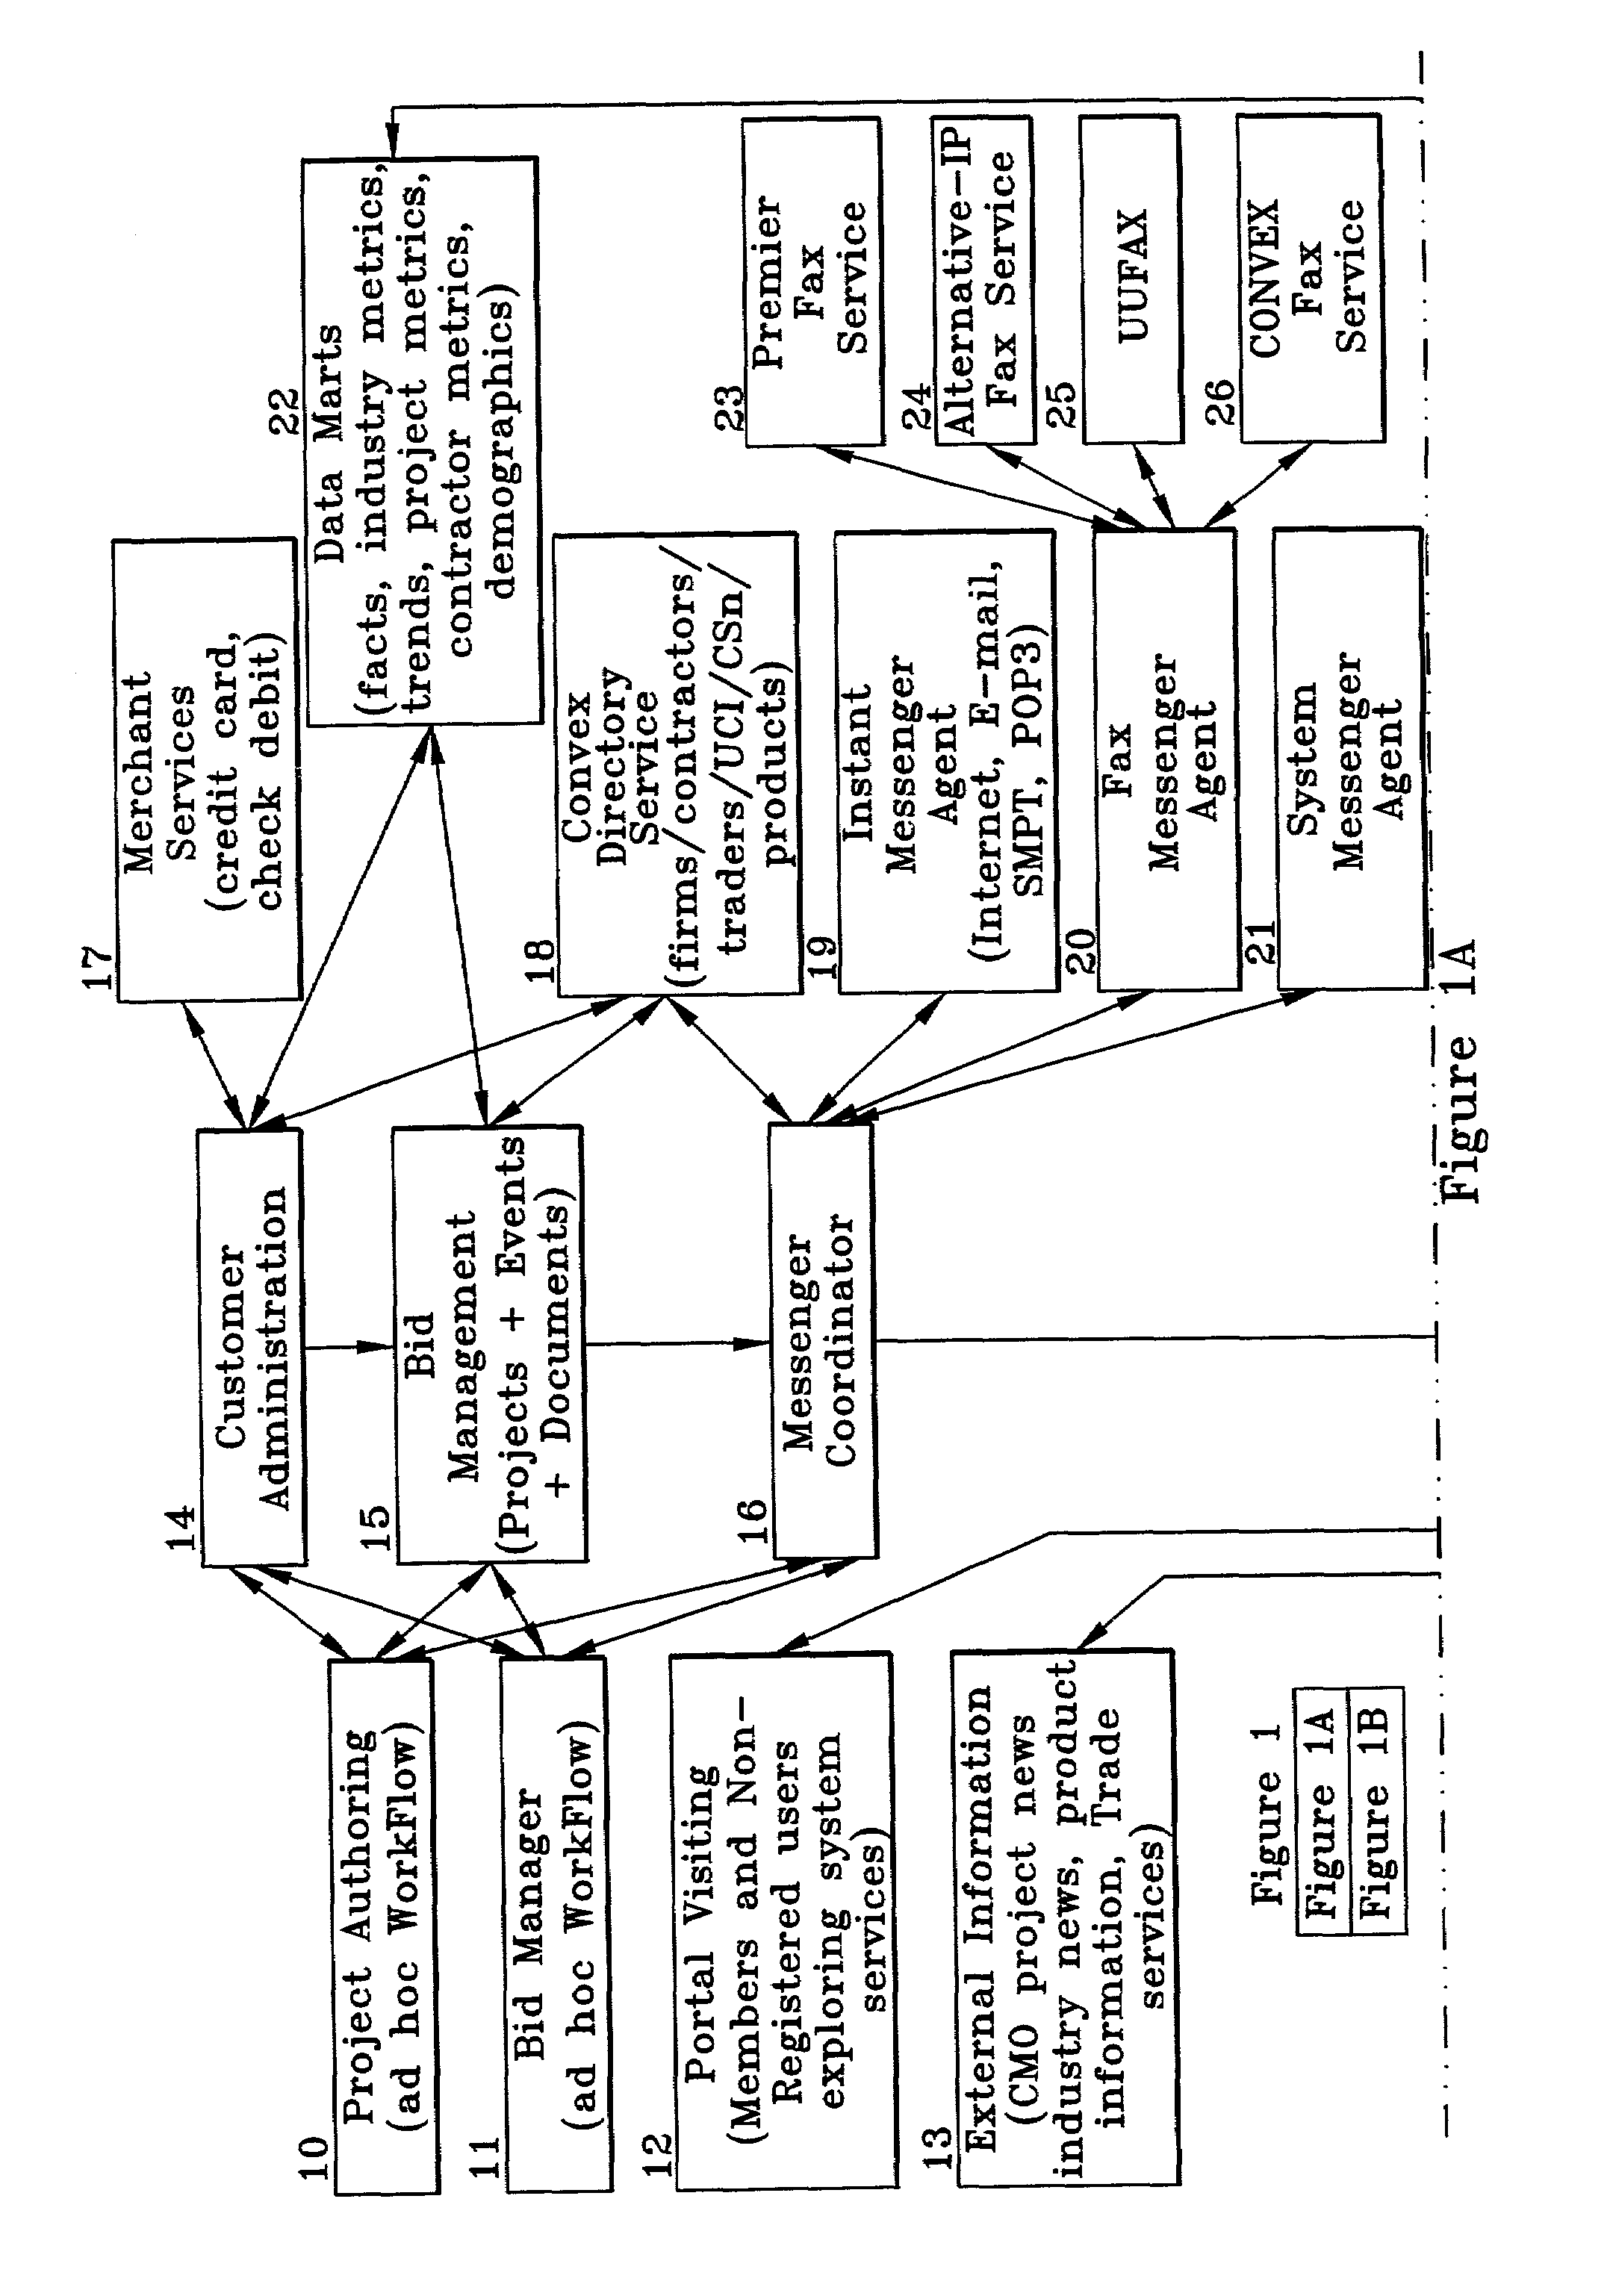 E-commerce bid and project management system and method for the construction industry